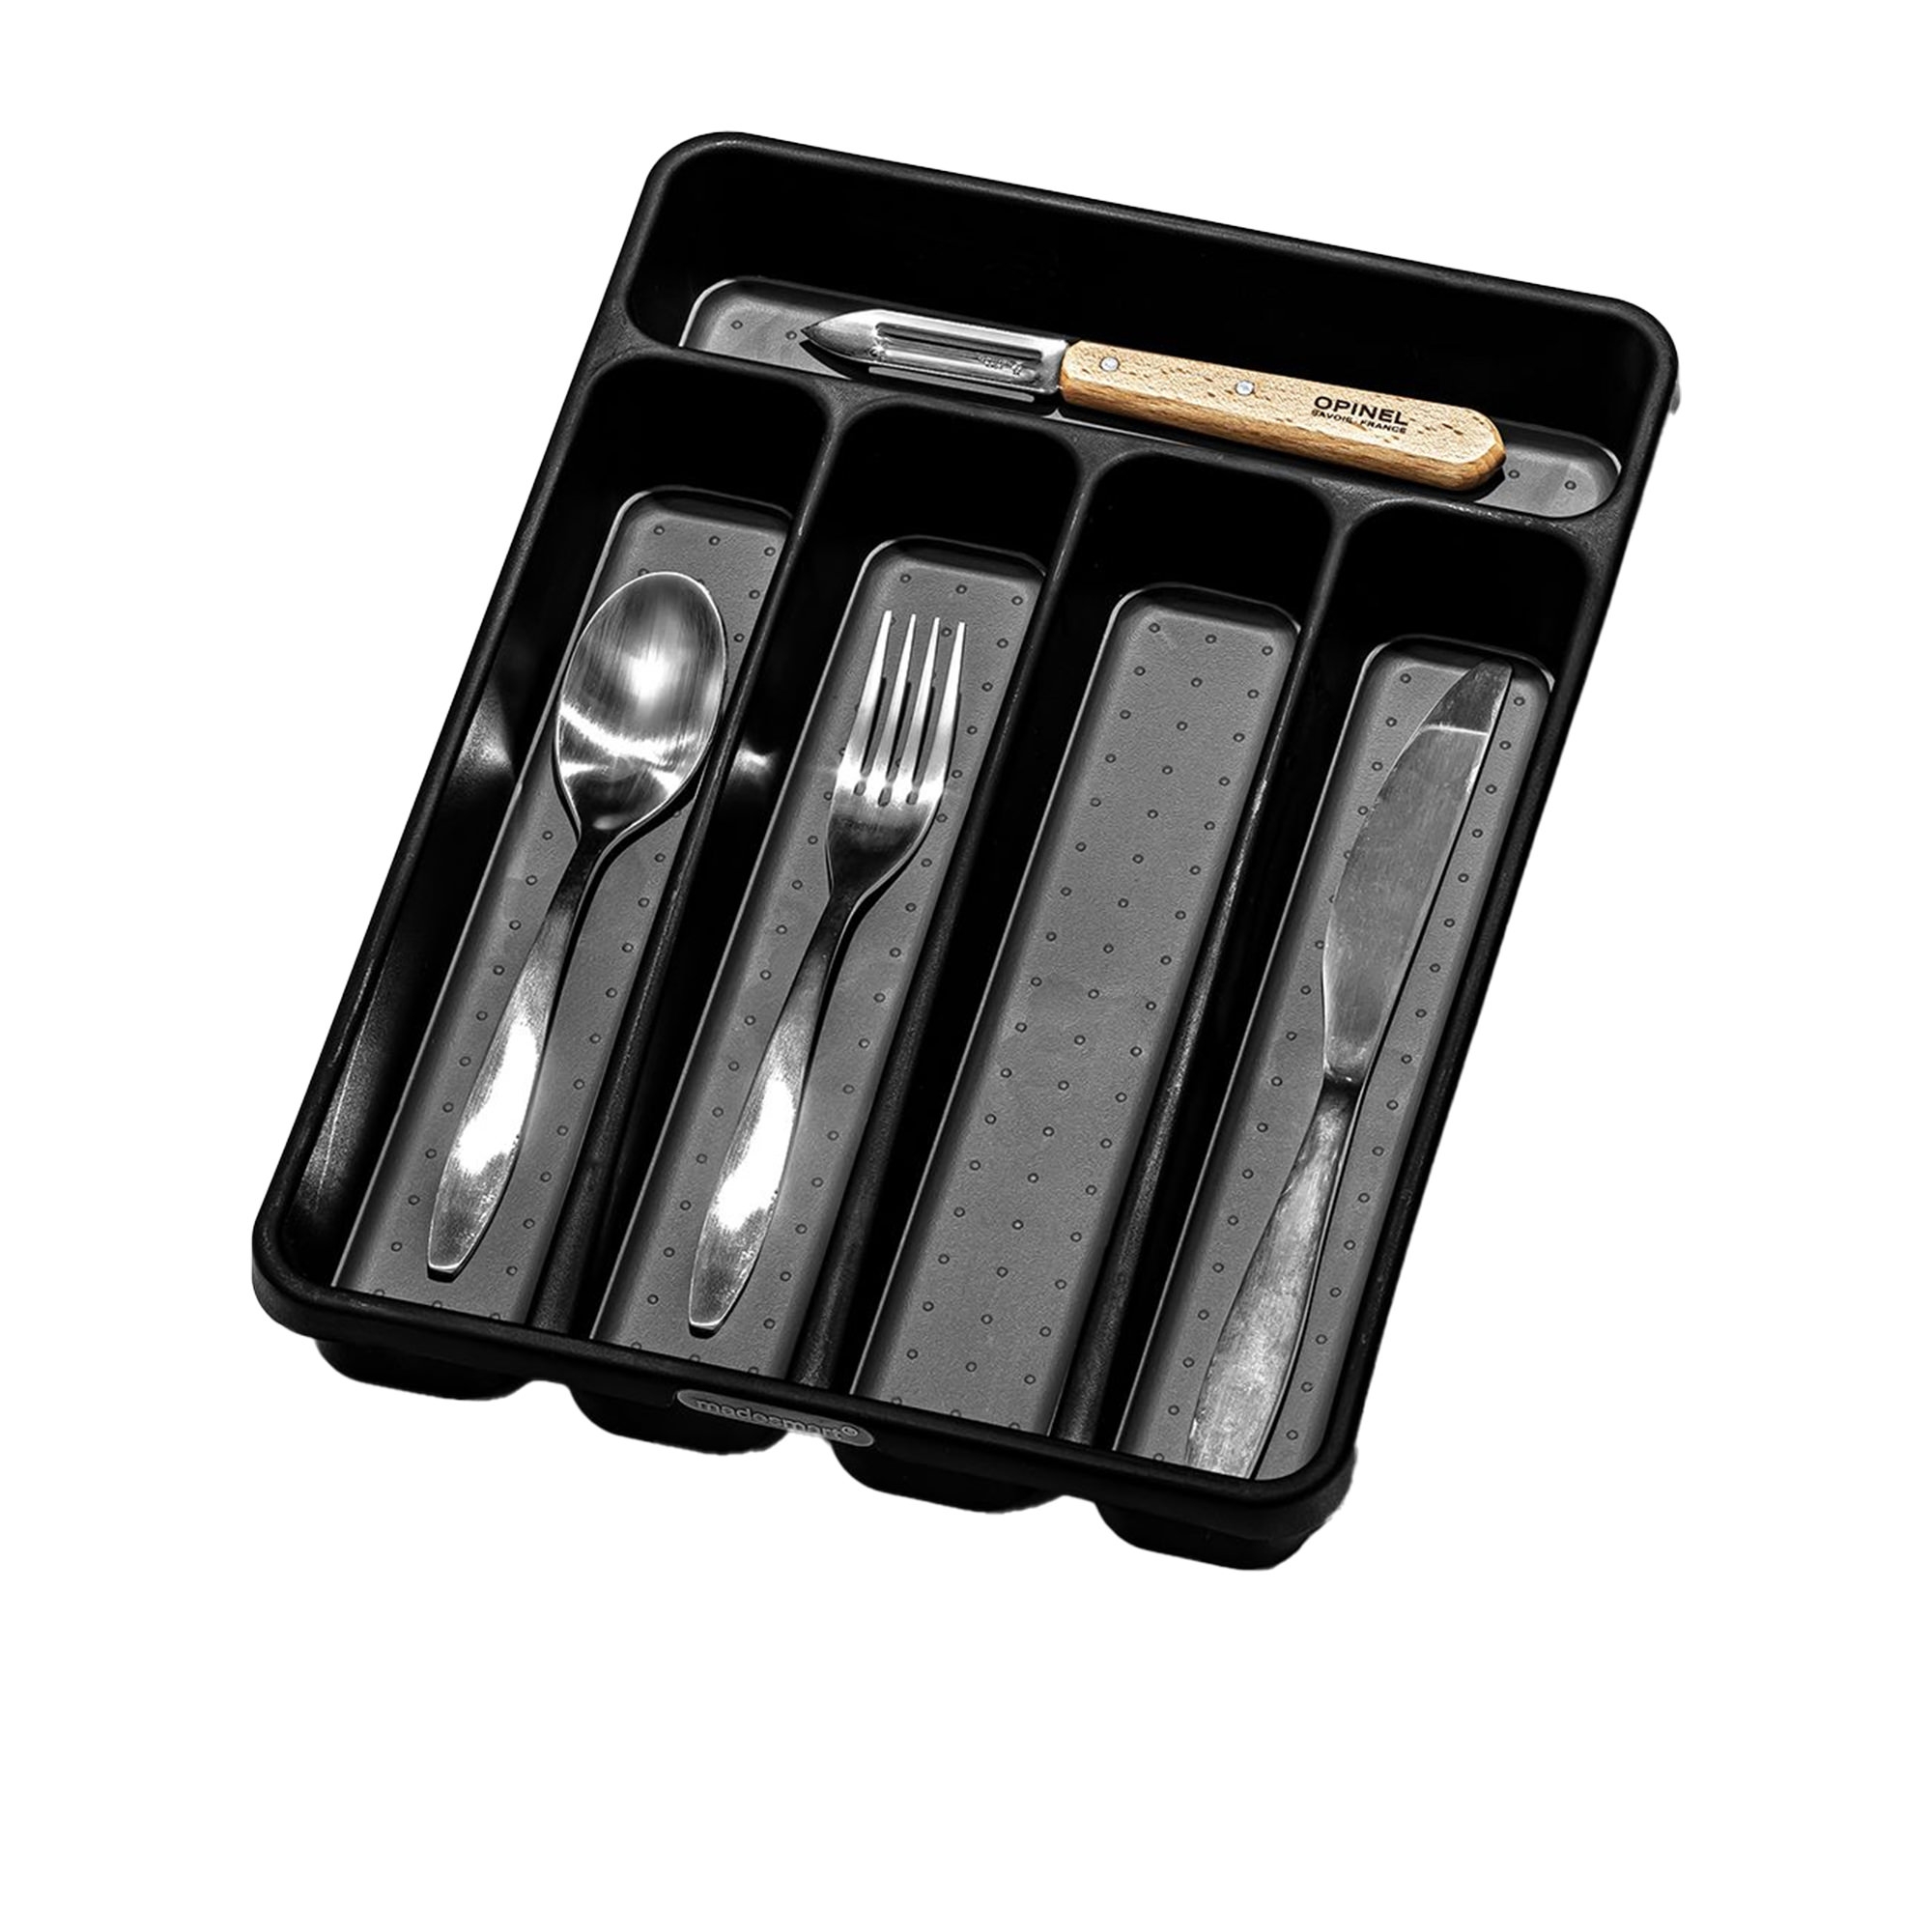 Madesmart Mini Cutlery Tray 5 Compartment Carbon Image 1